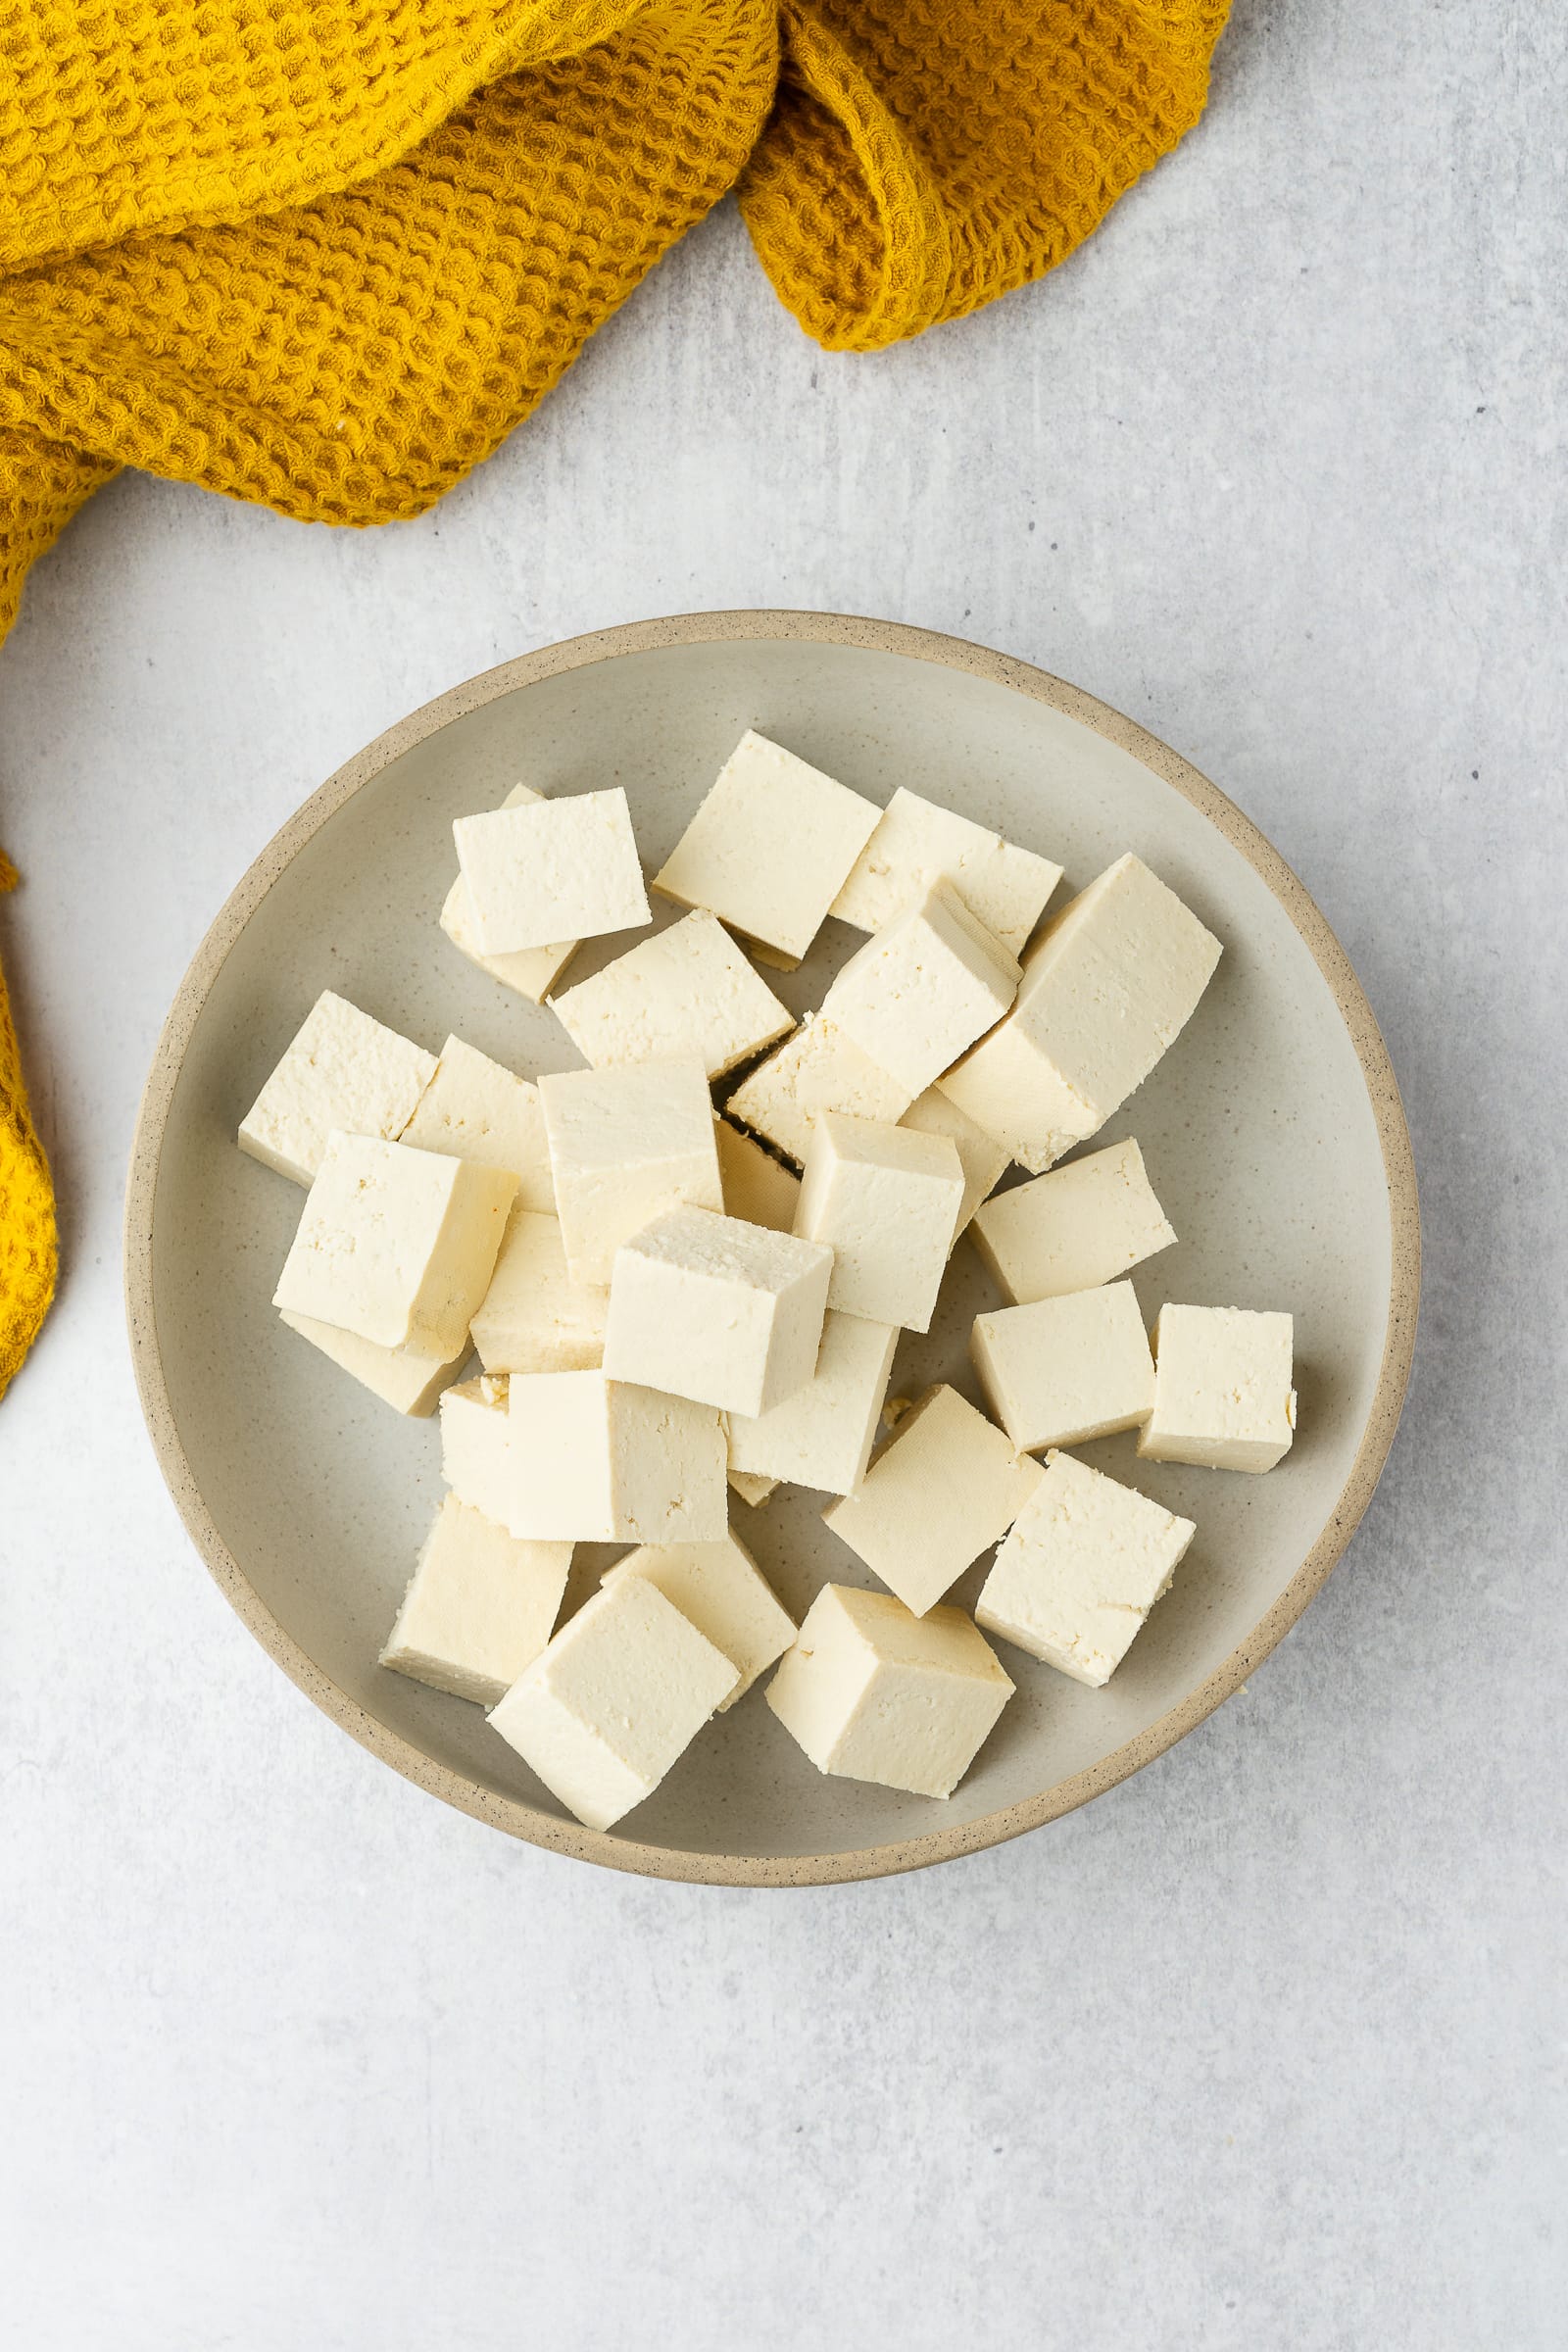 Cubed tofu in a shallow bowl.